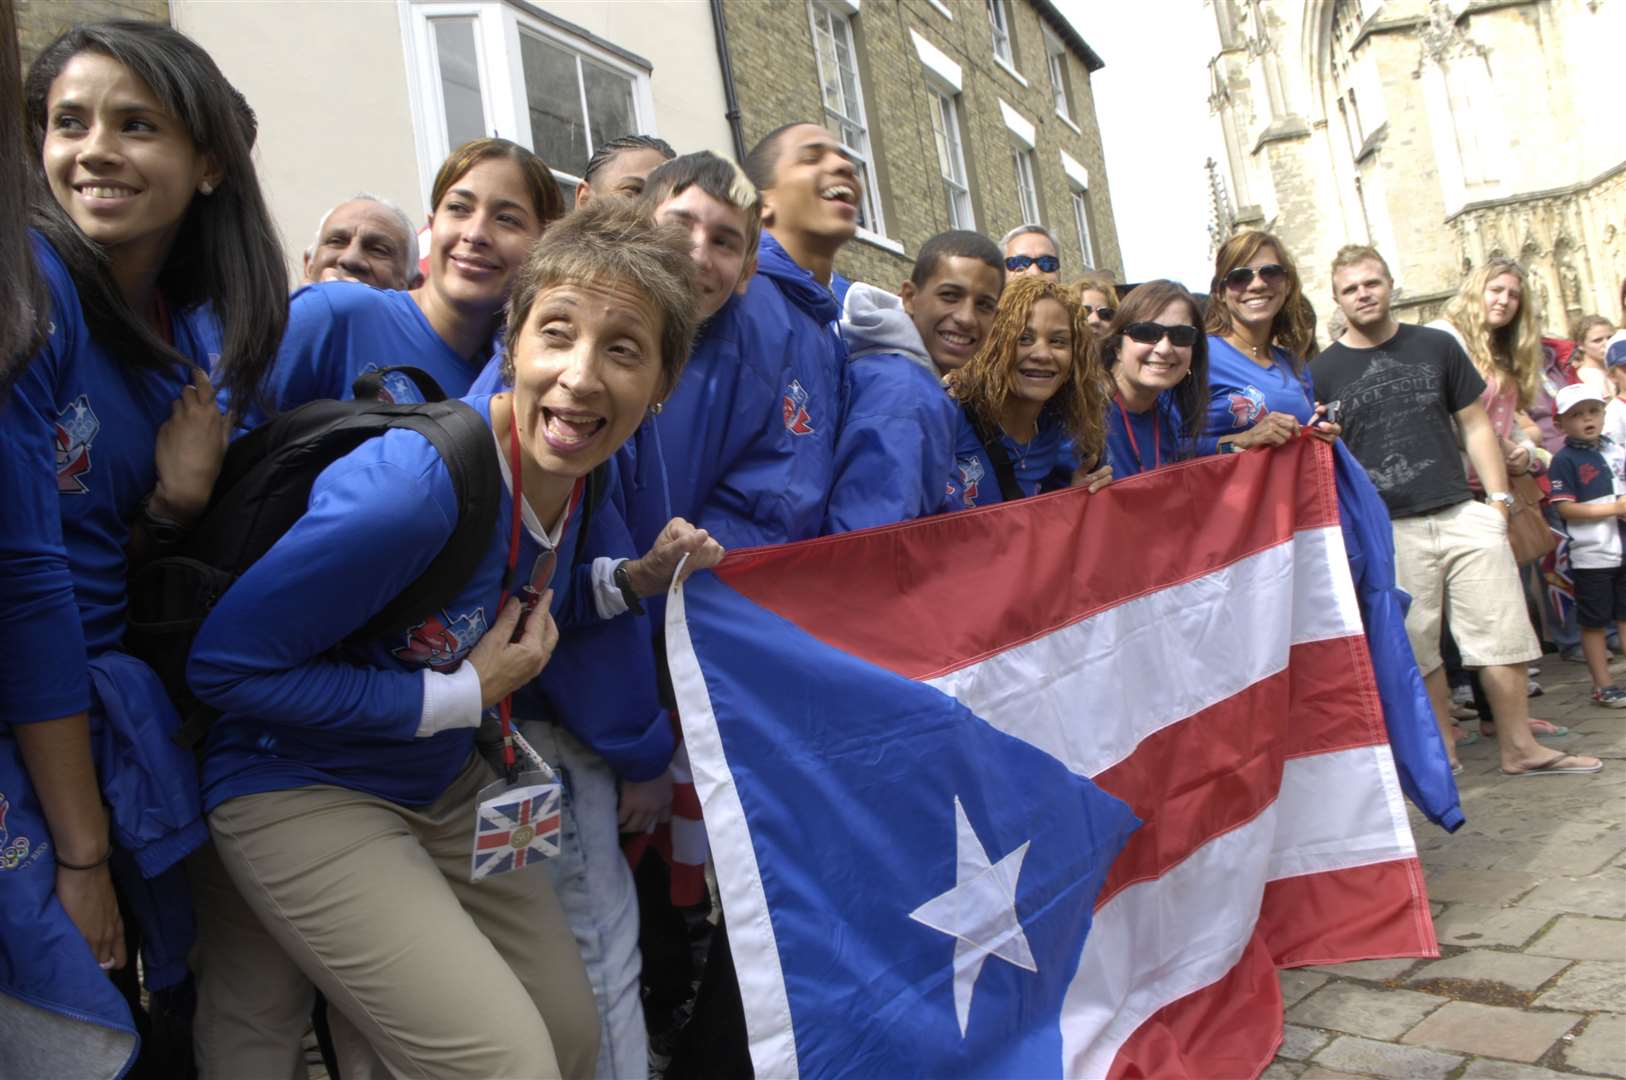 The Puerto Rico Olympic team waiting for the torch's arrival at Canterbury Cathedral